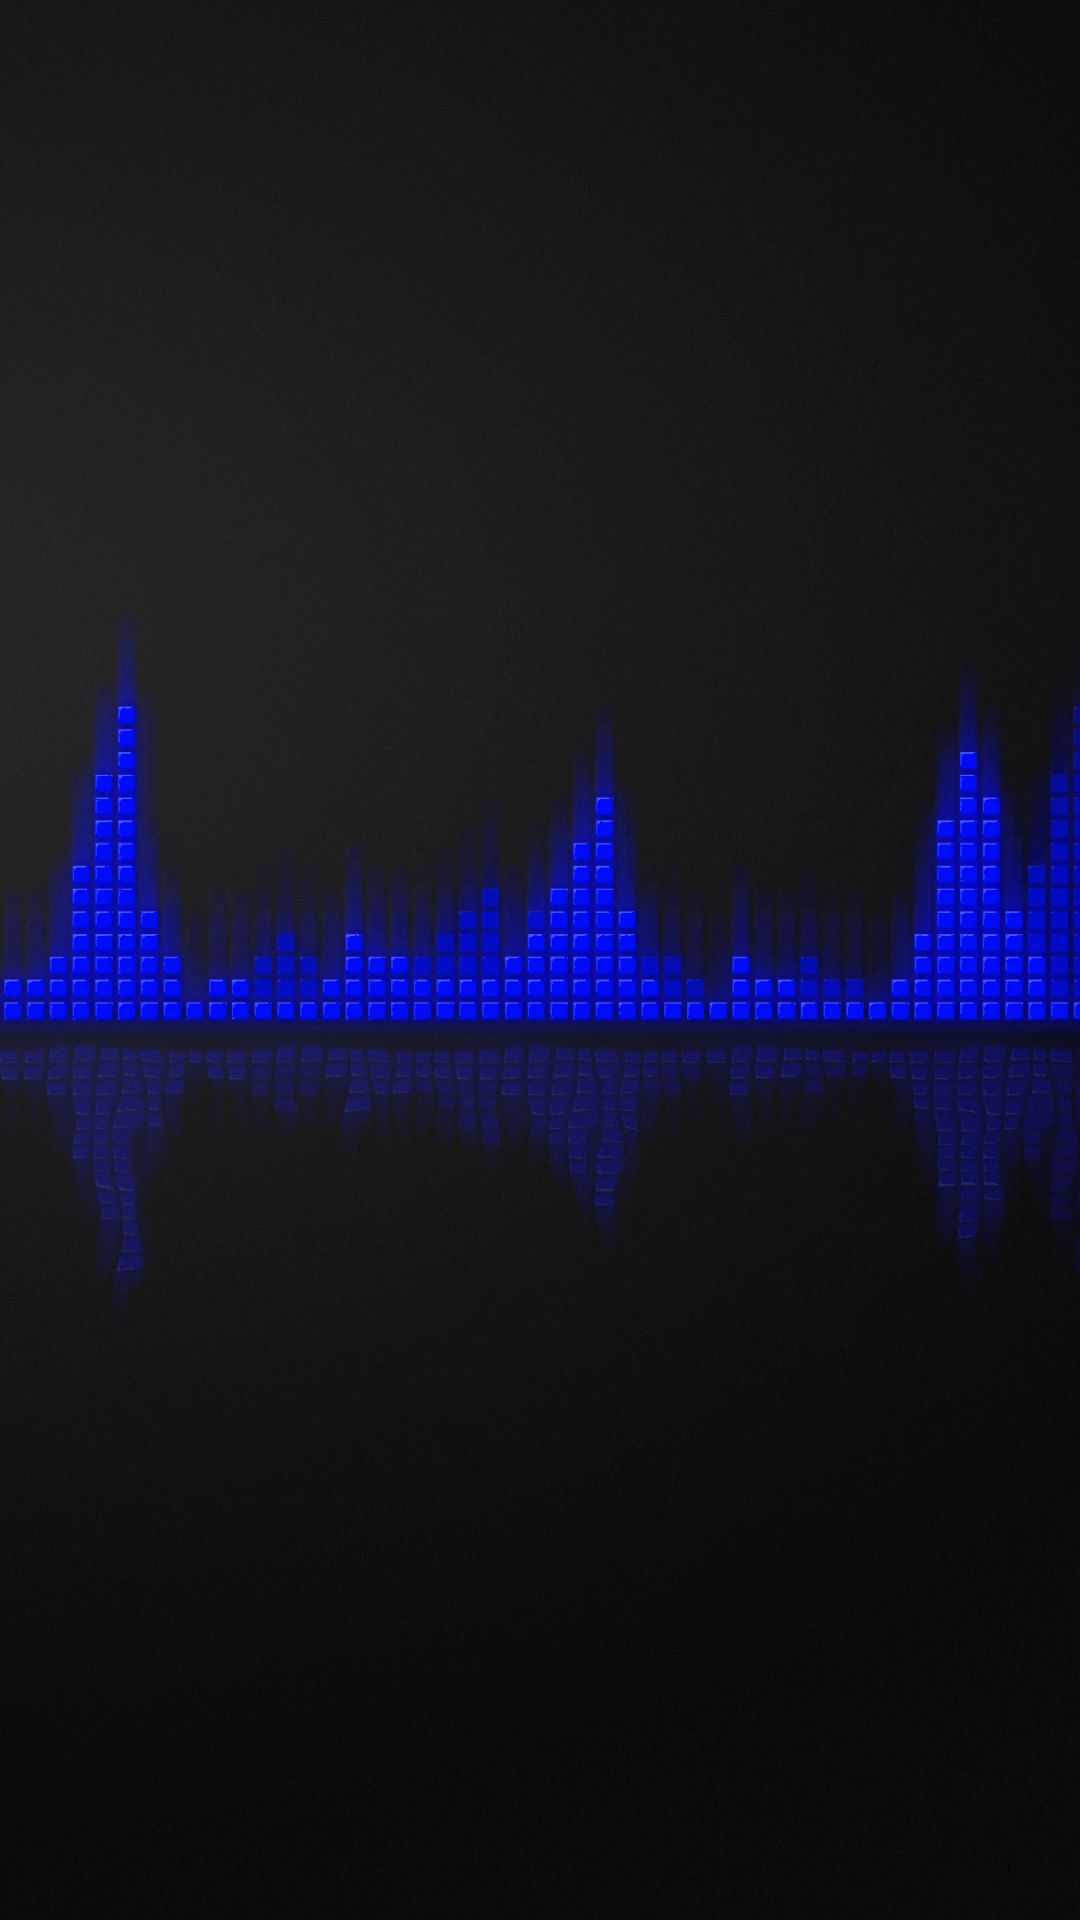 abstract, black, blue, equalizer, music